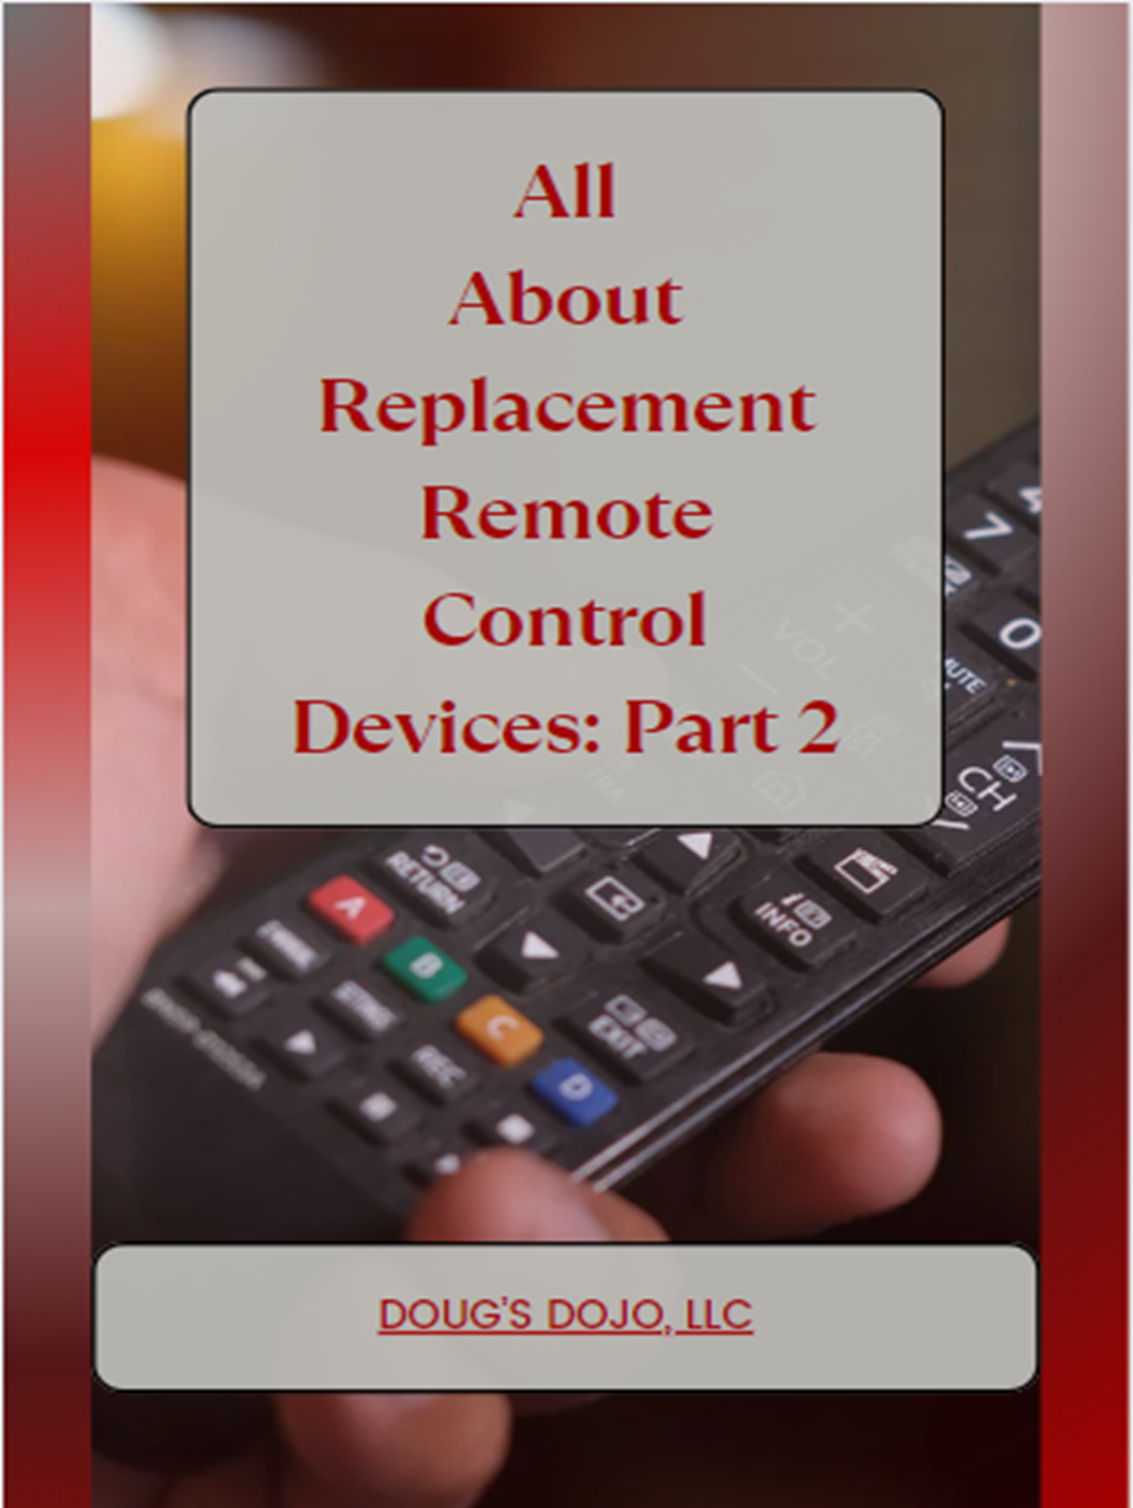 All About Replacement Remote Control Devices: Part 2